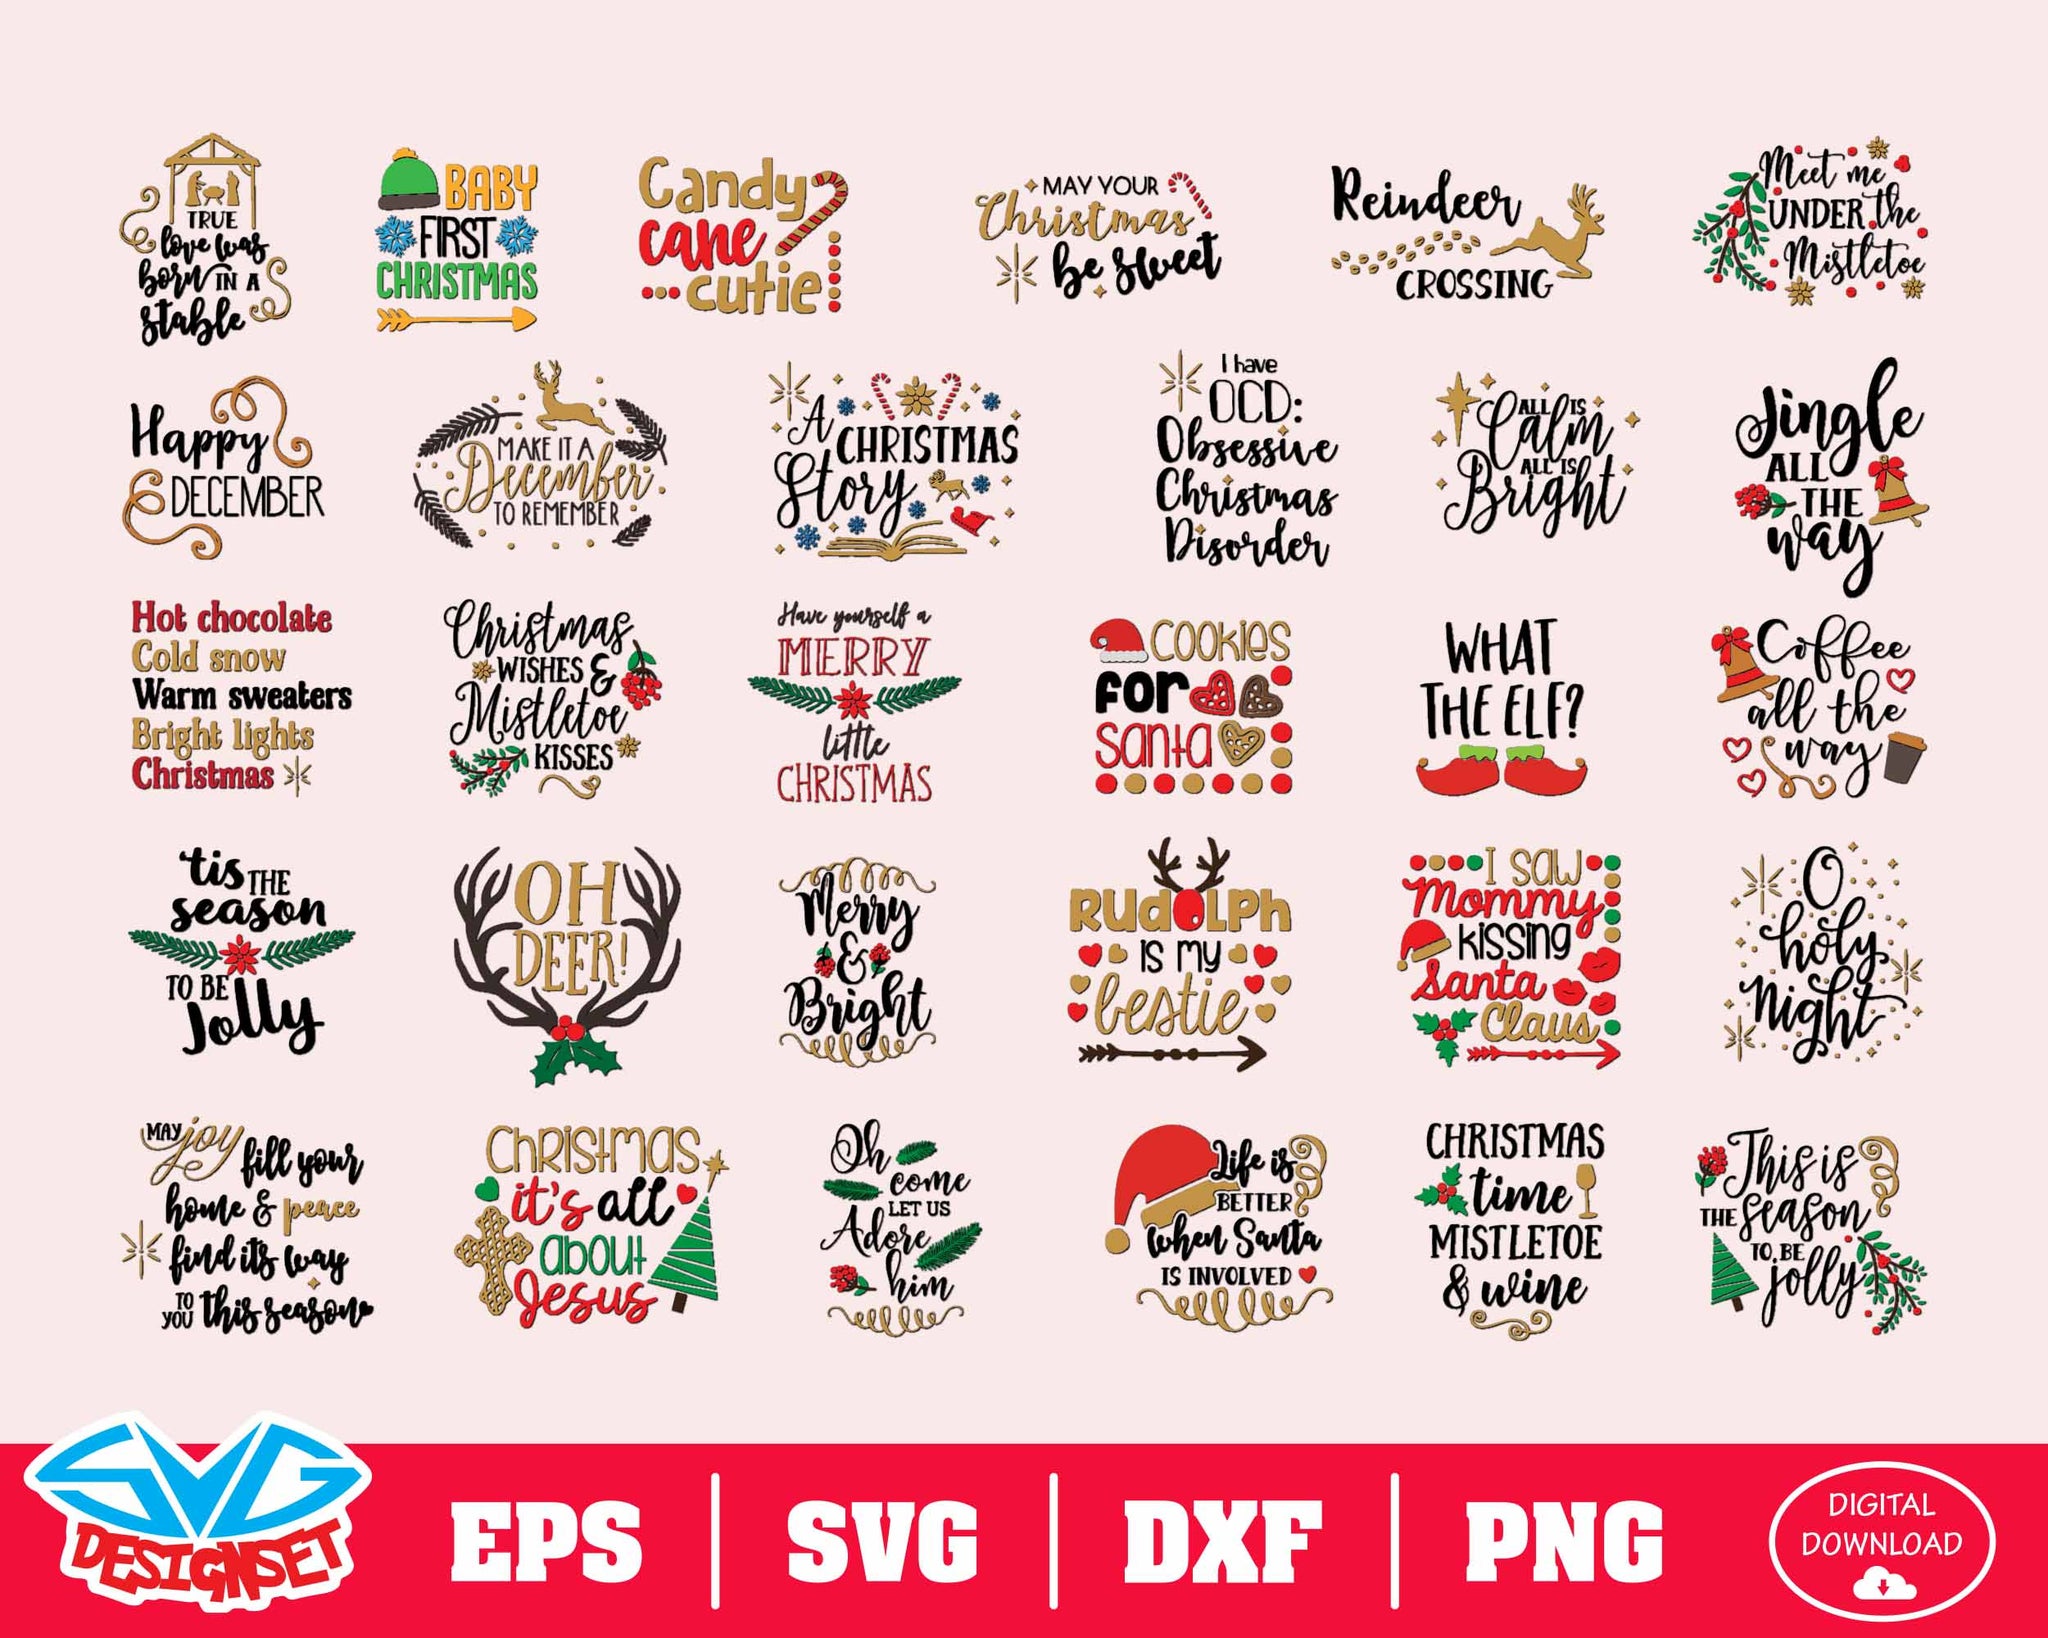 Christmas Bundle Svg, Dxf, Eps, Png, Clipart, Silhouette and Cutfiles #9 - SVGDesignSets